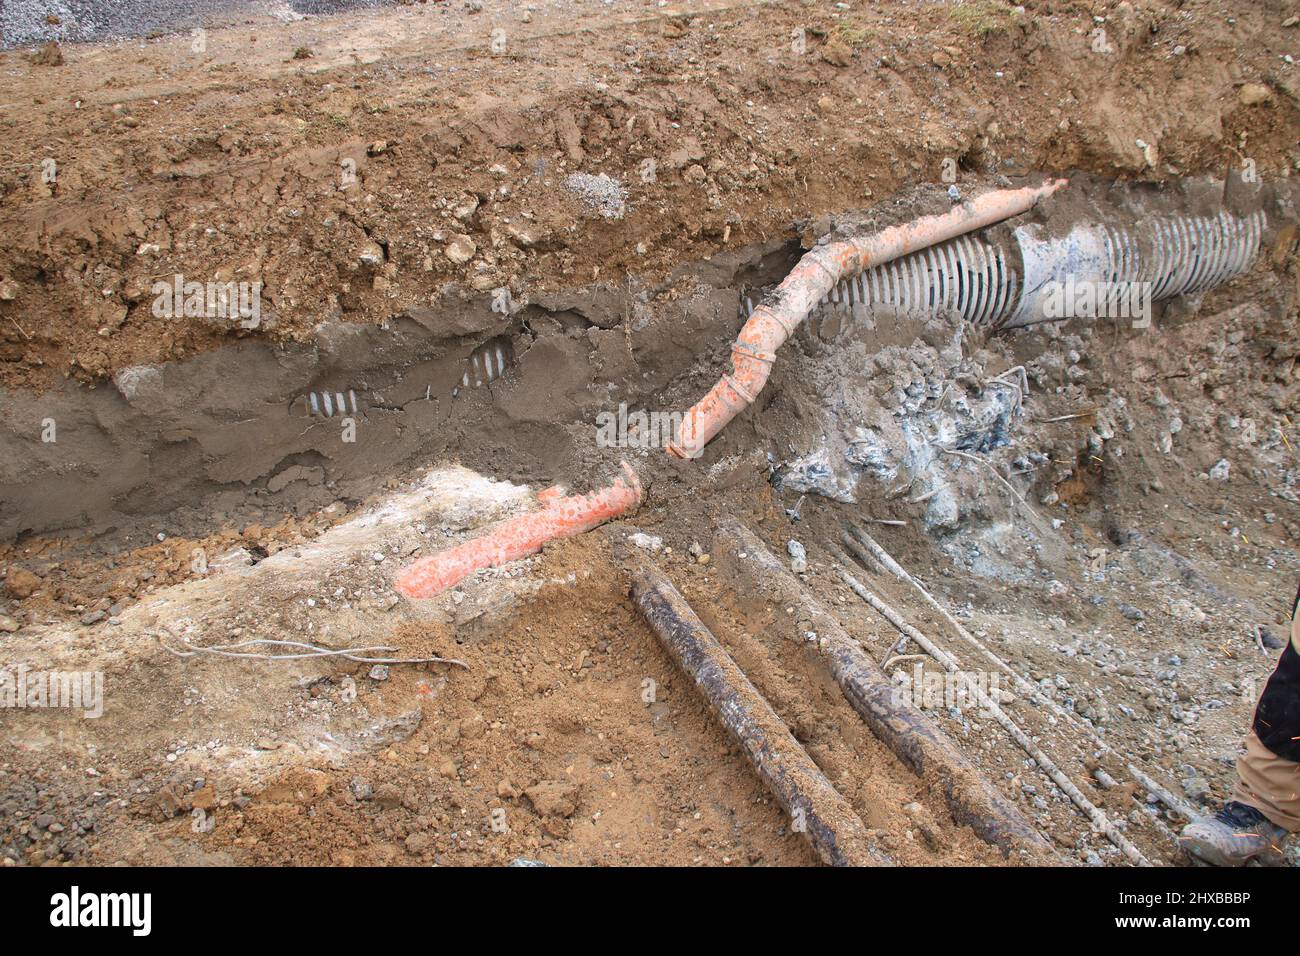 Supply line in an excavation pit Stock Photo